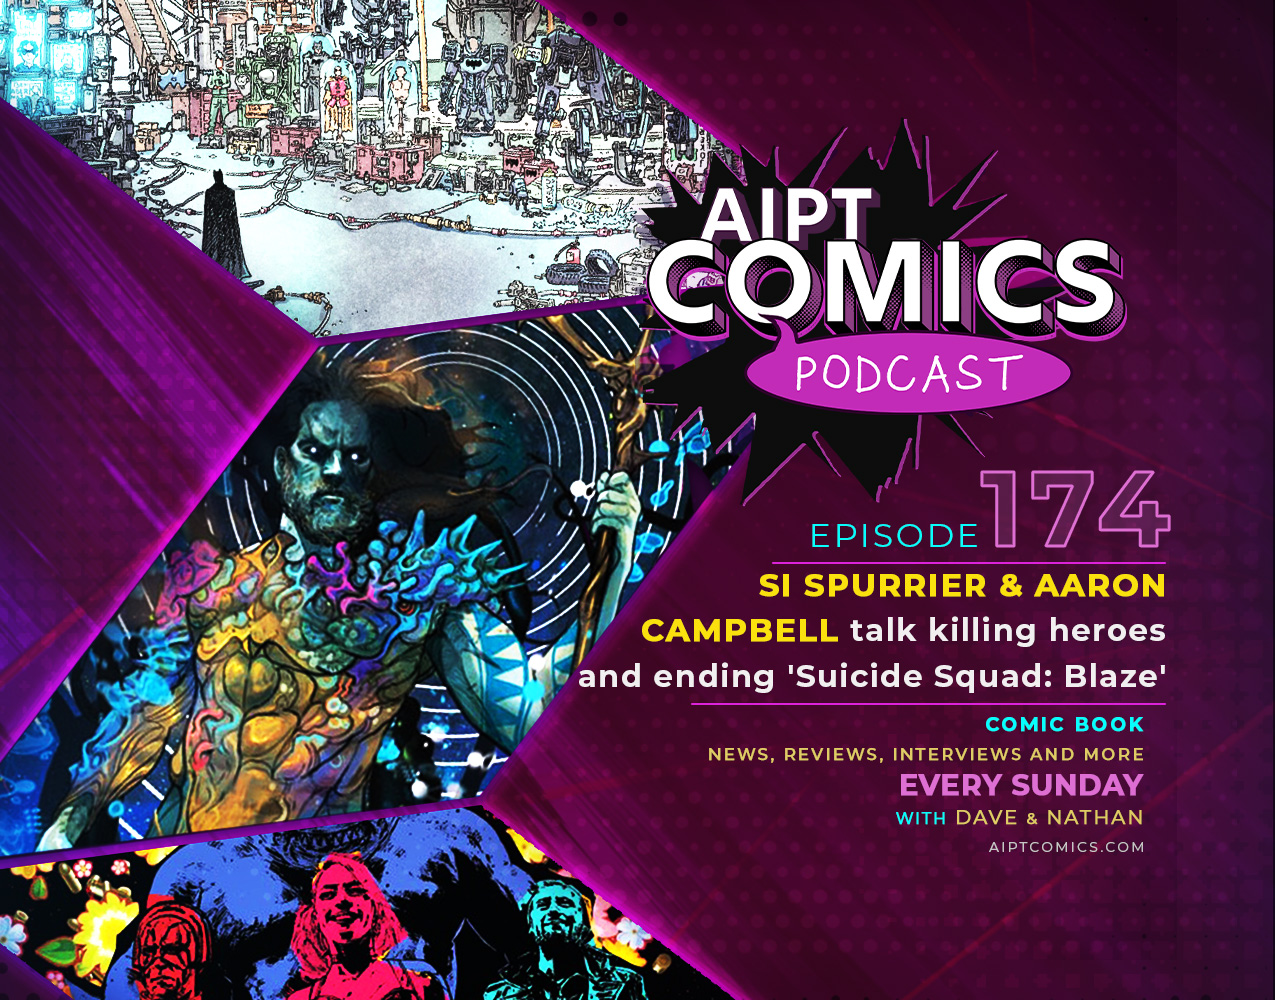 AIPT Comics podcast episode 174: Si Spurrier and Aaron Campbell talk killing heroes and ending 'Suicide Squad: Blaze'